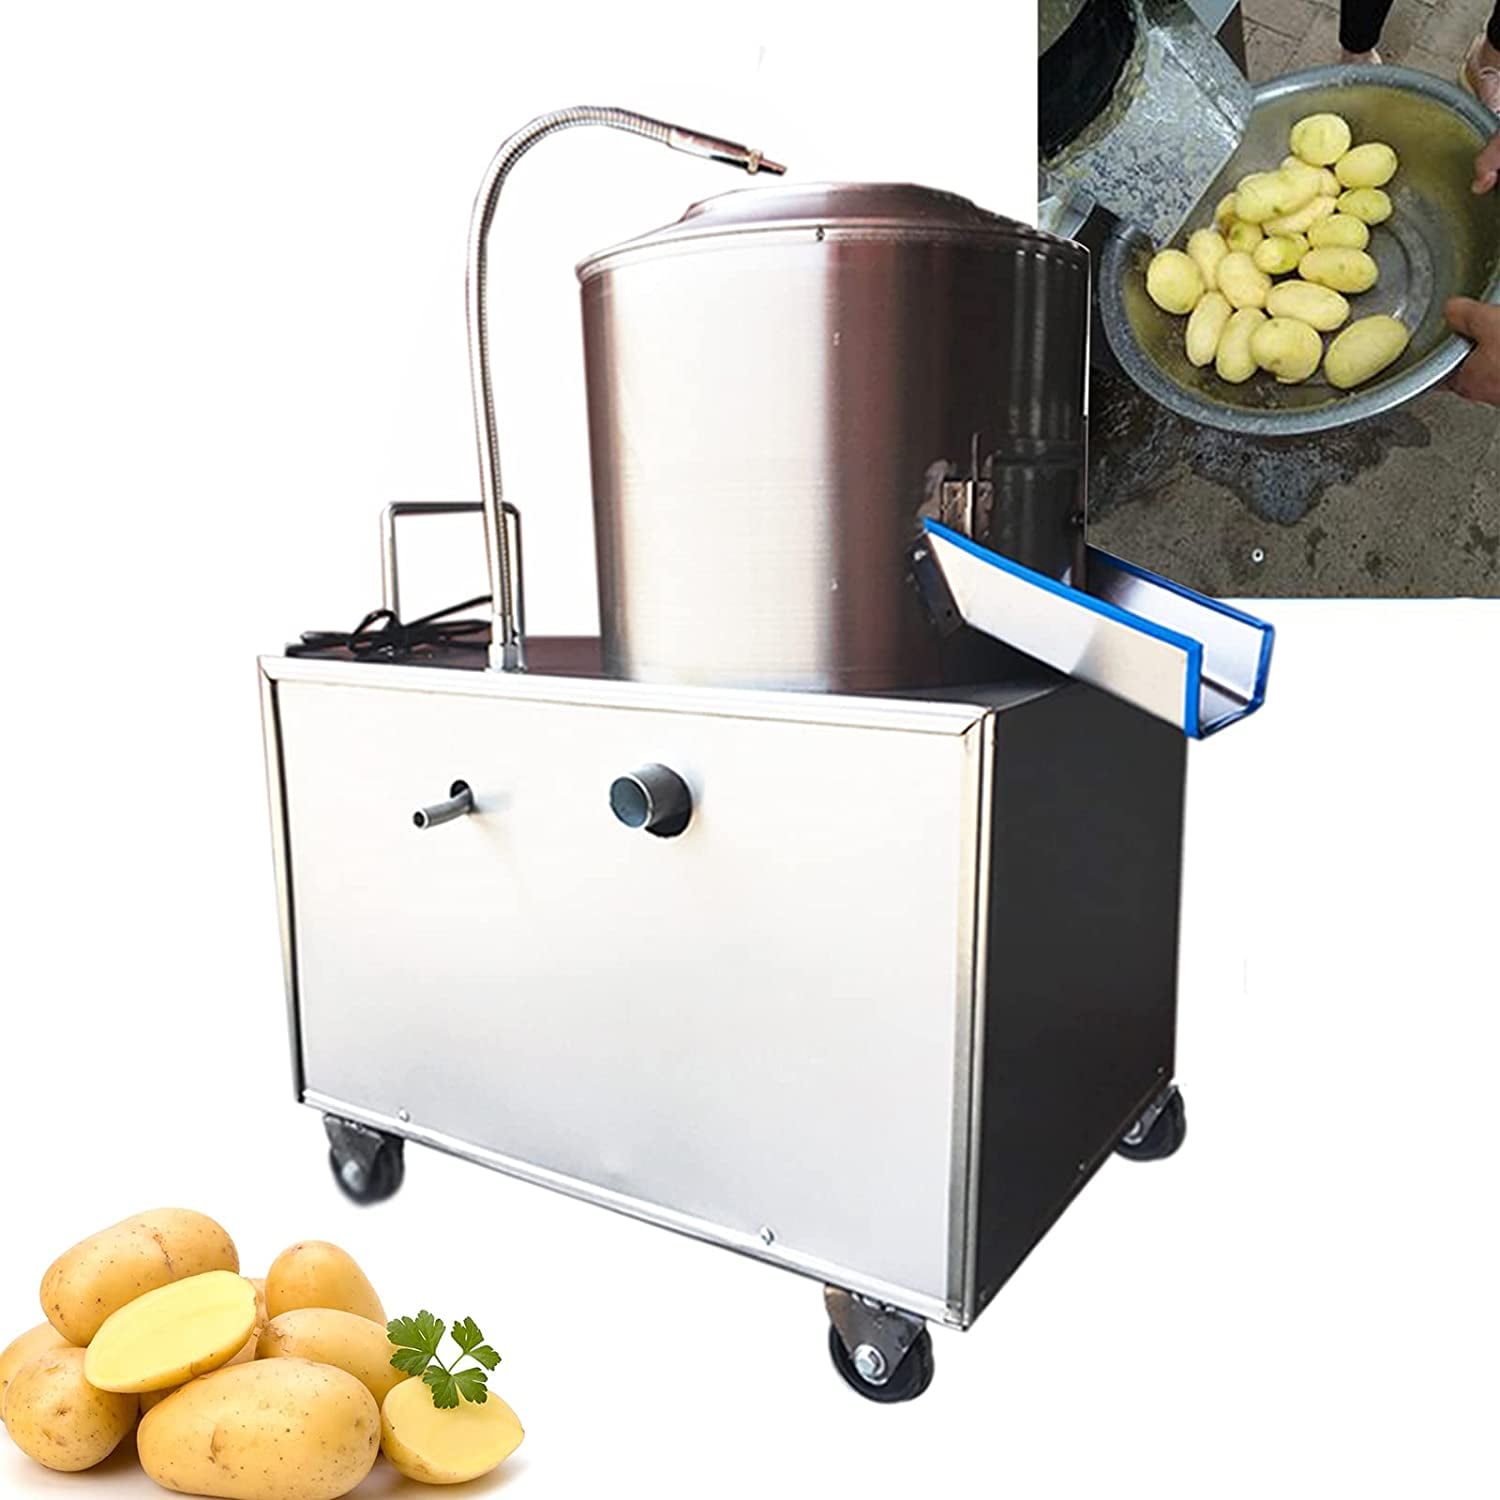 Ffps Commercial Potato Peeler 1500W 150-220KG / Hour Automatic Potato Washer Caster Wheels 430 Stainless Steel Electric Peeler for Kitchen Fruits